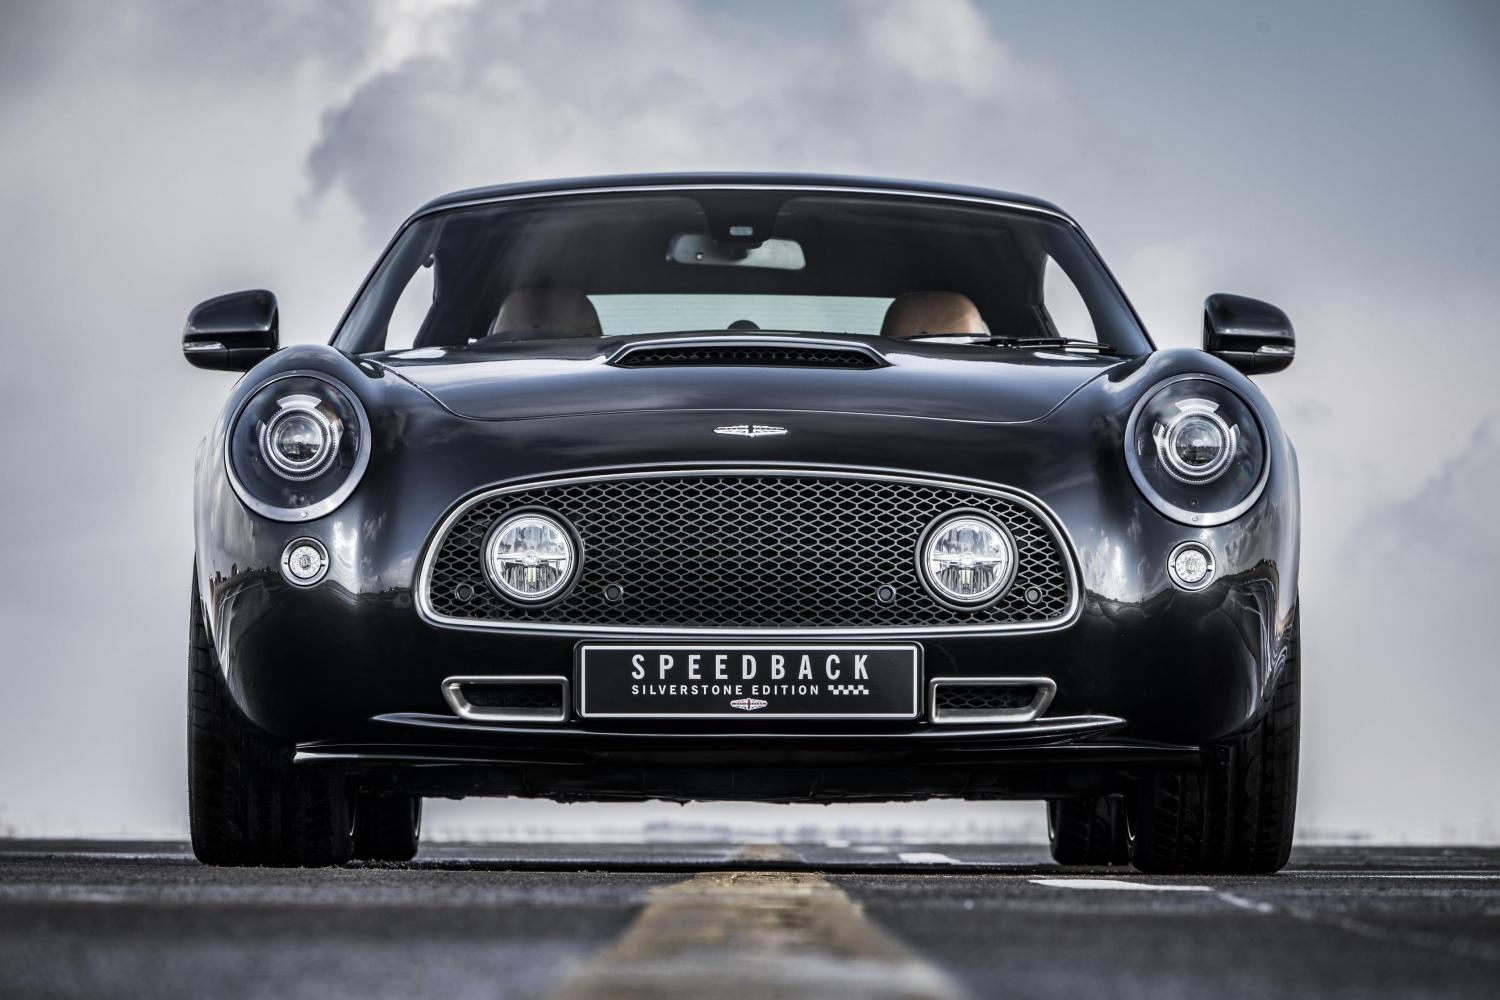 David Brown's New Baby Blends Retro Style And A 593bhp Jaguar V8